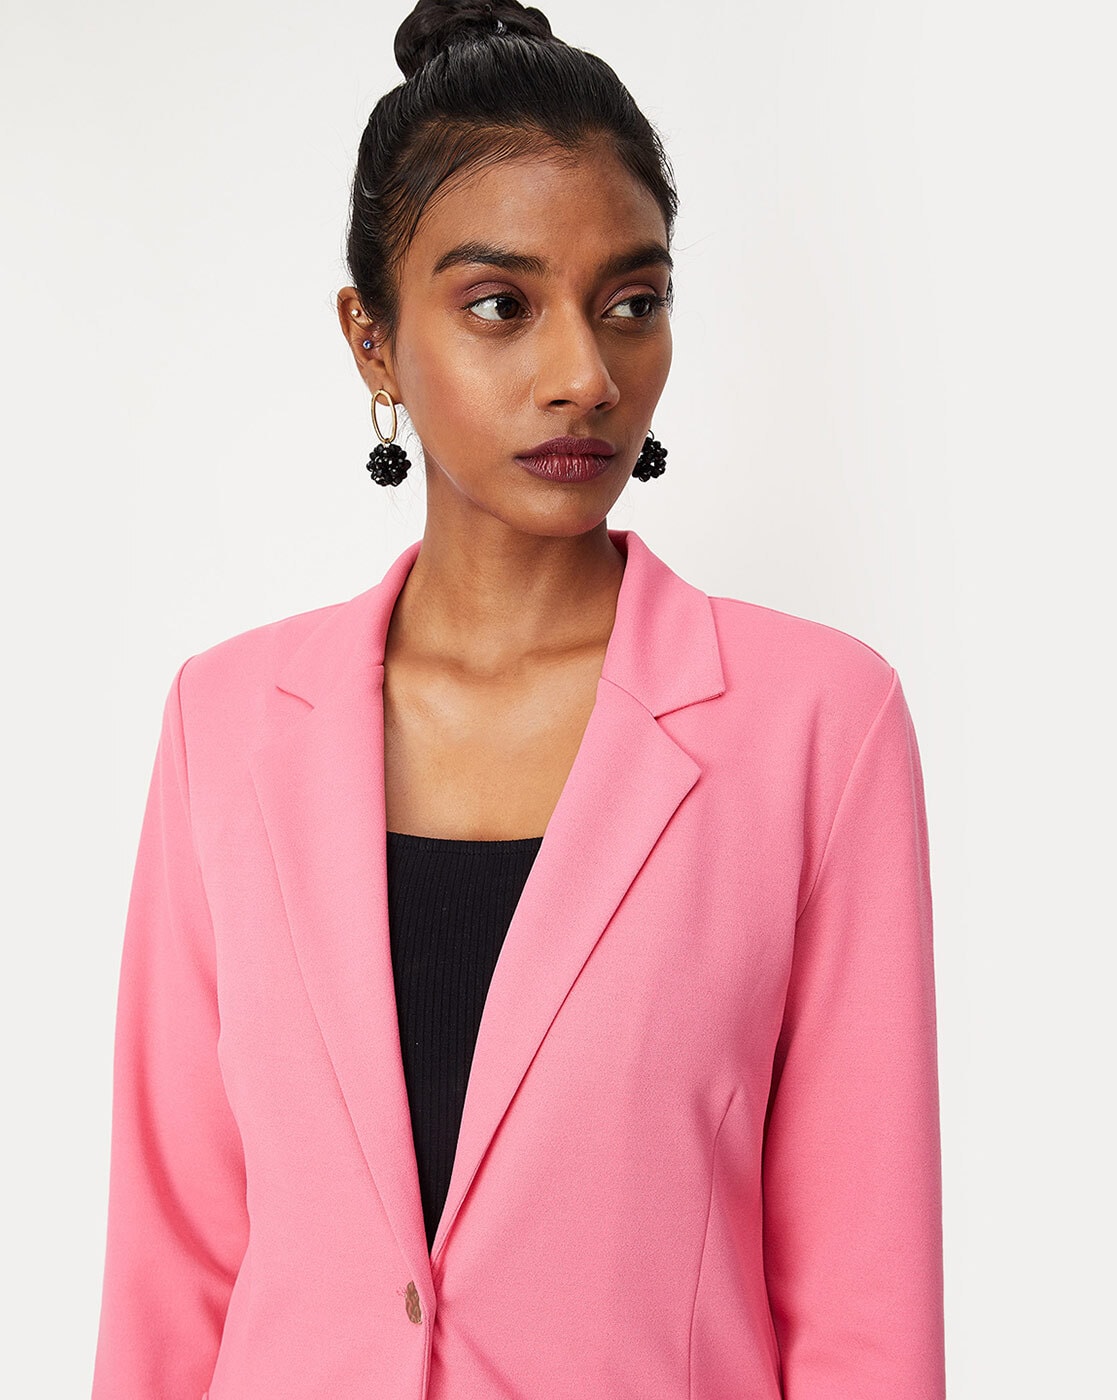 Buy PINK Blazers & Waistcoats for Women by MAX Online